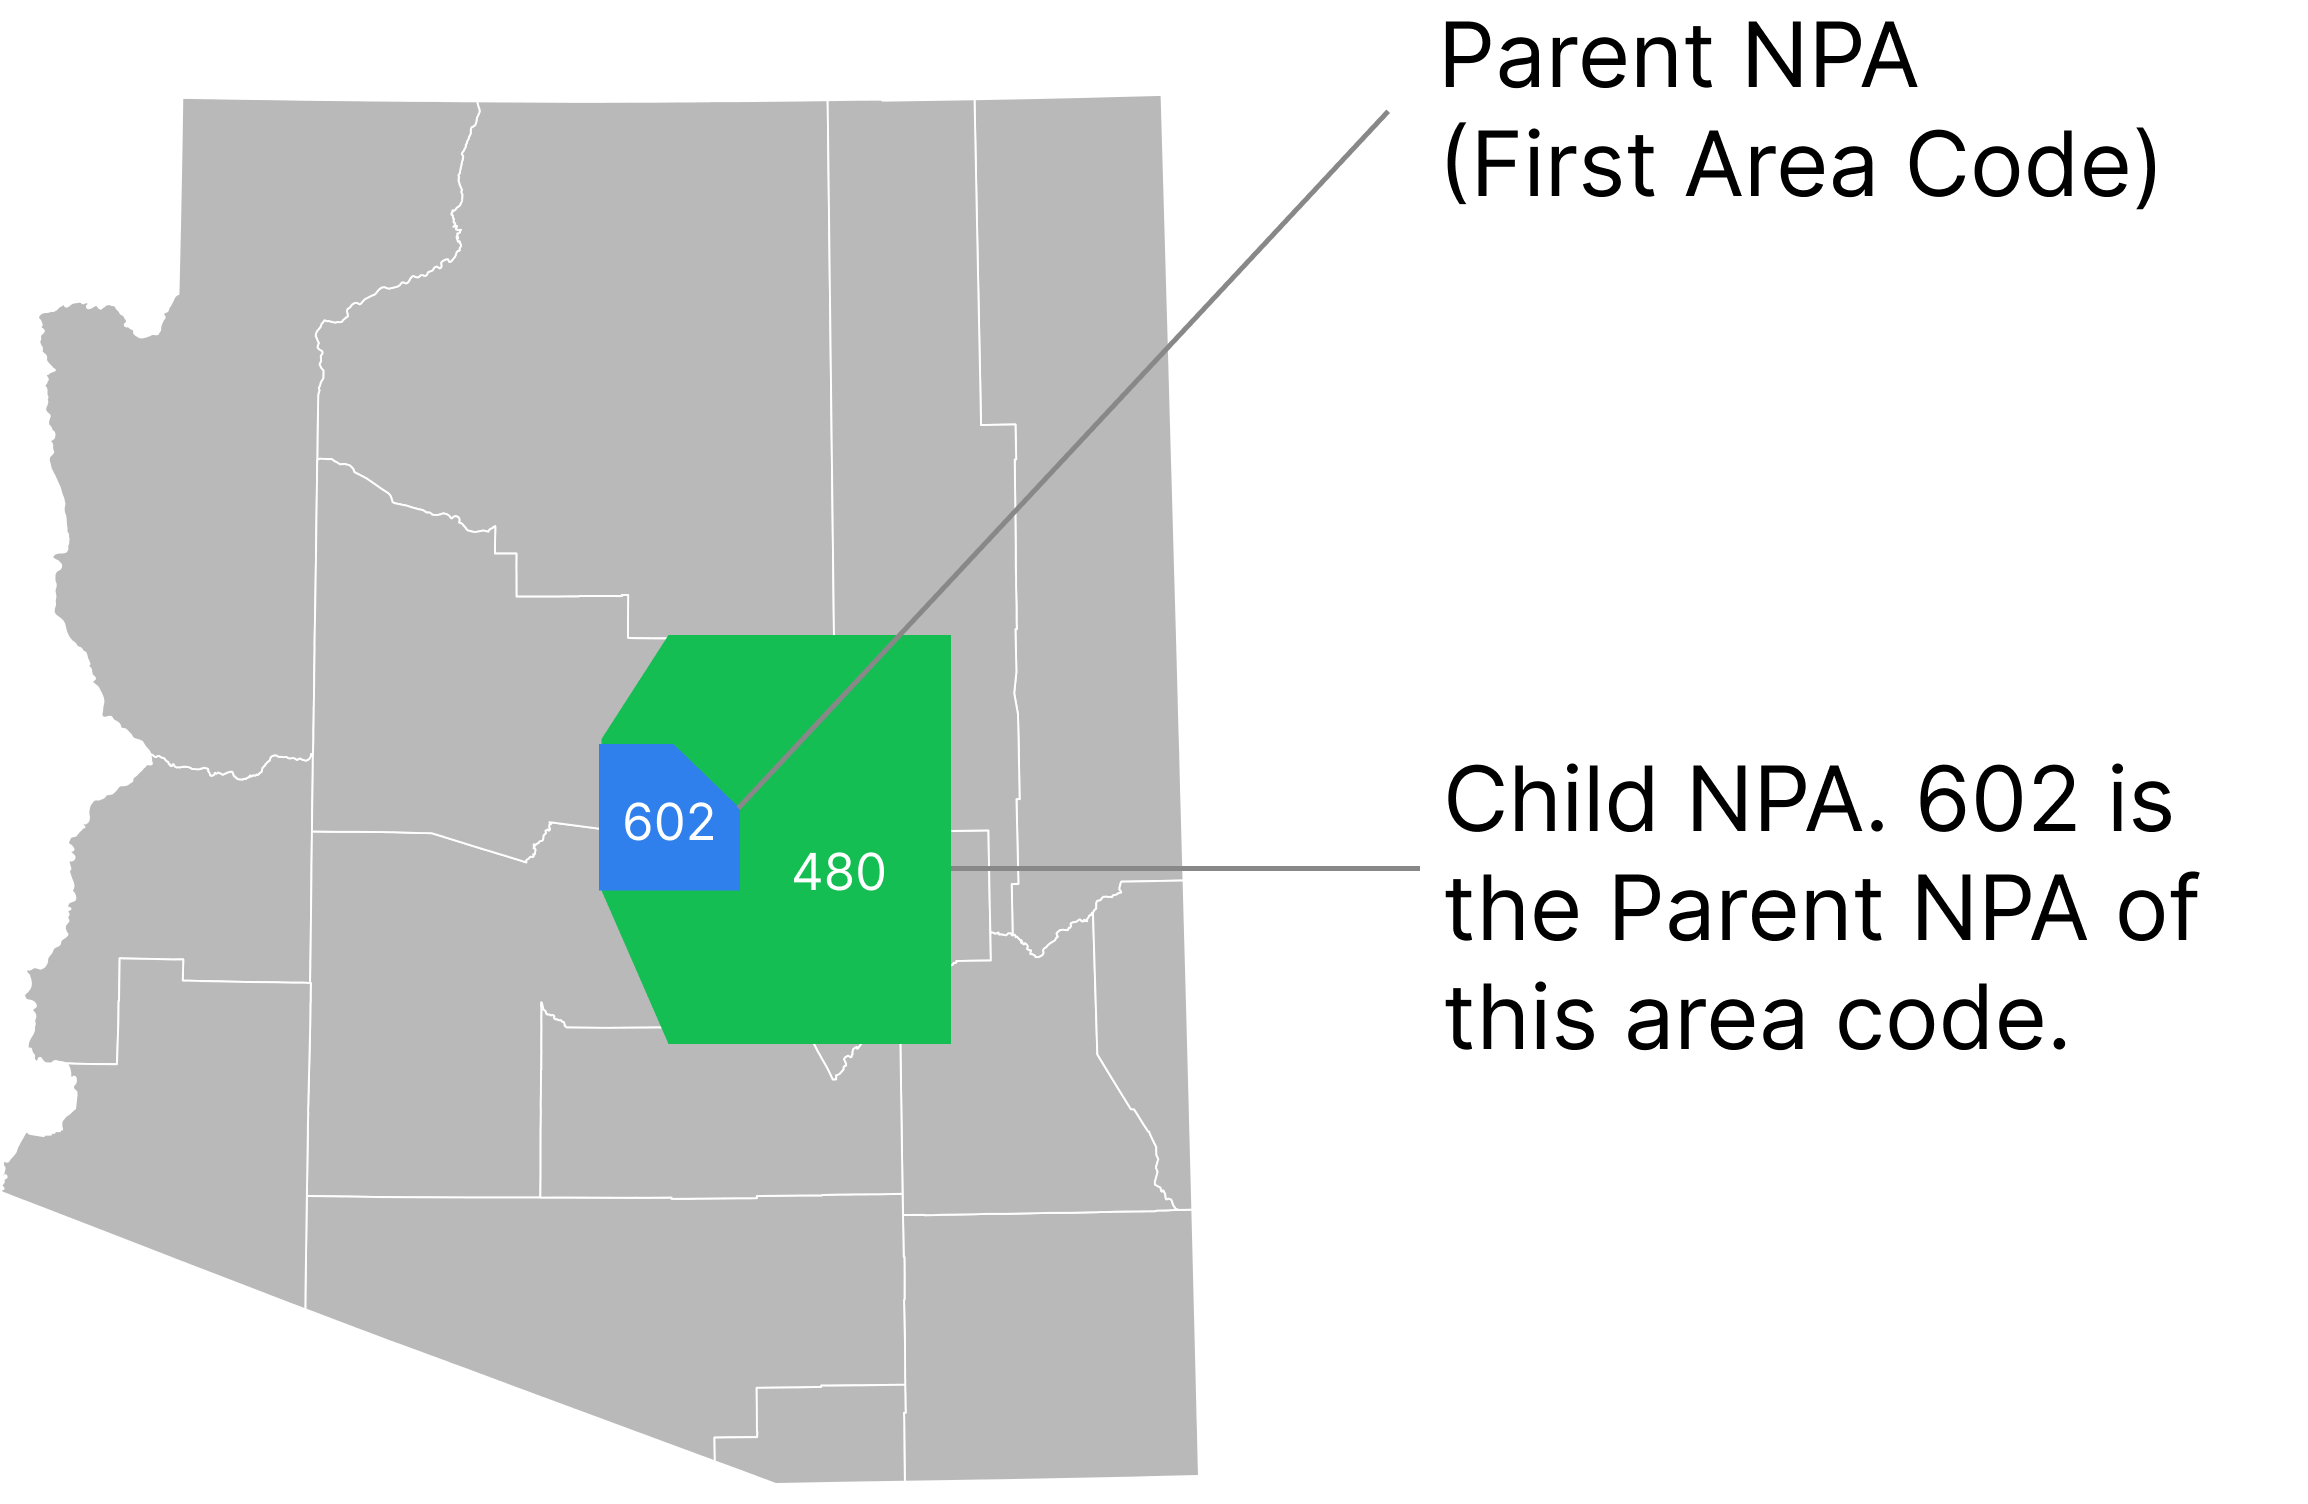 Example of the Parent NPA association between two area codes